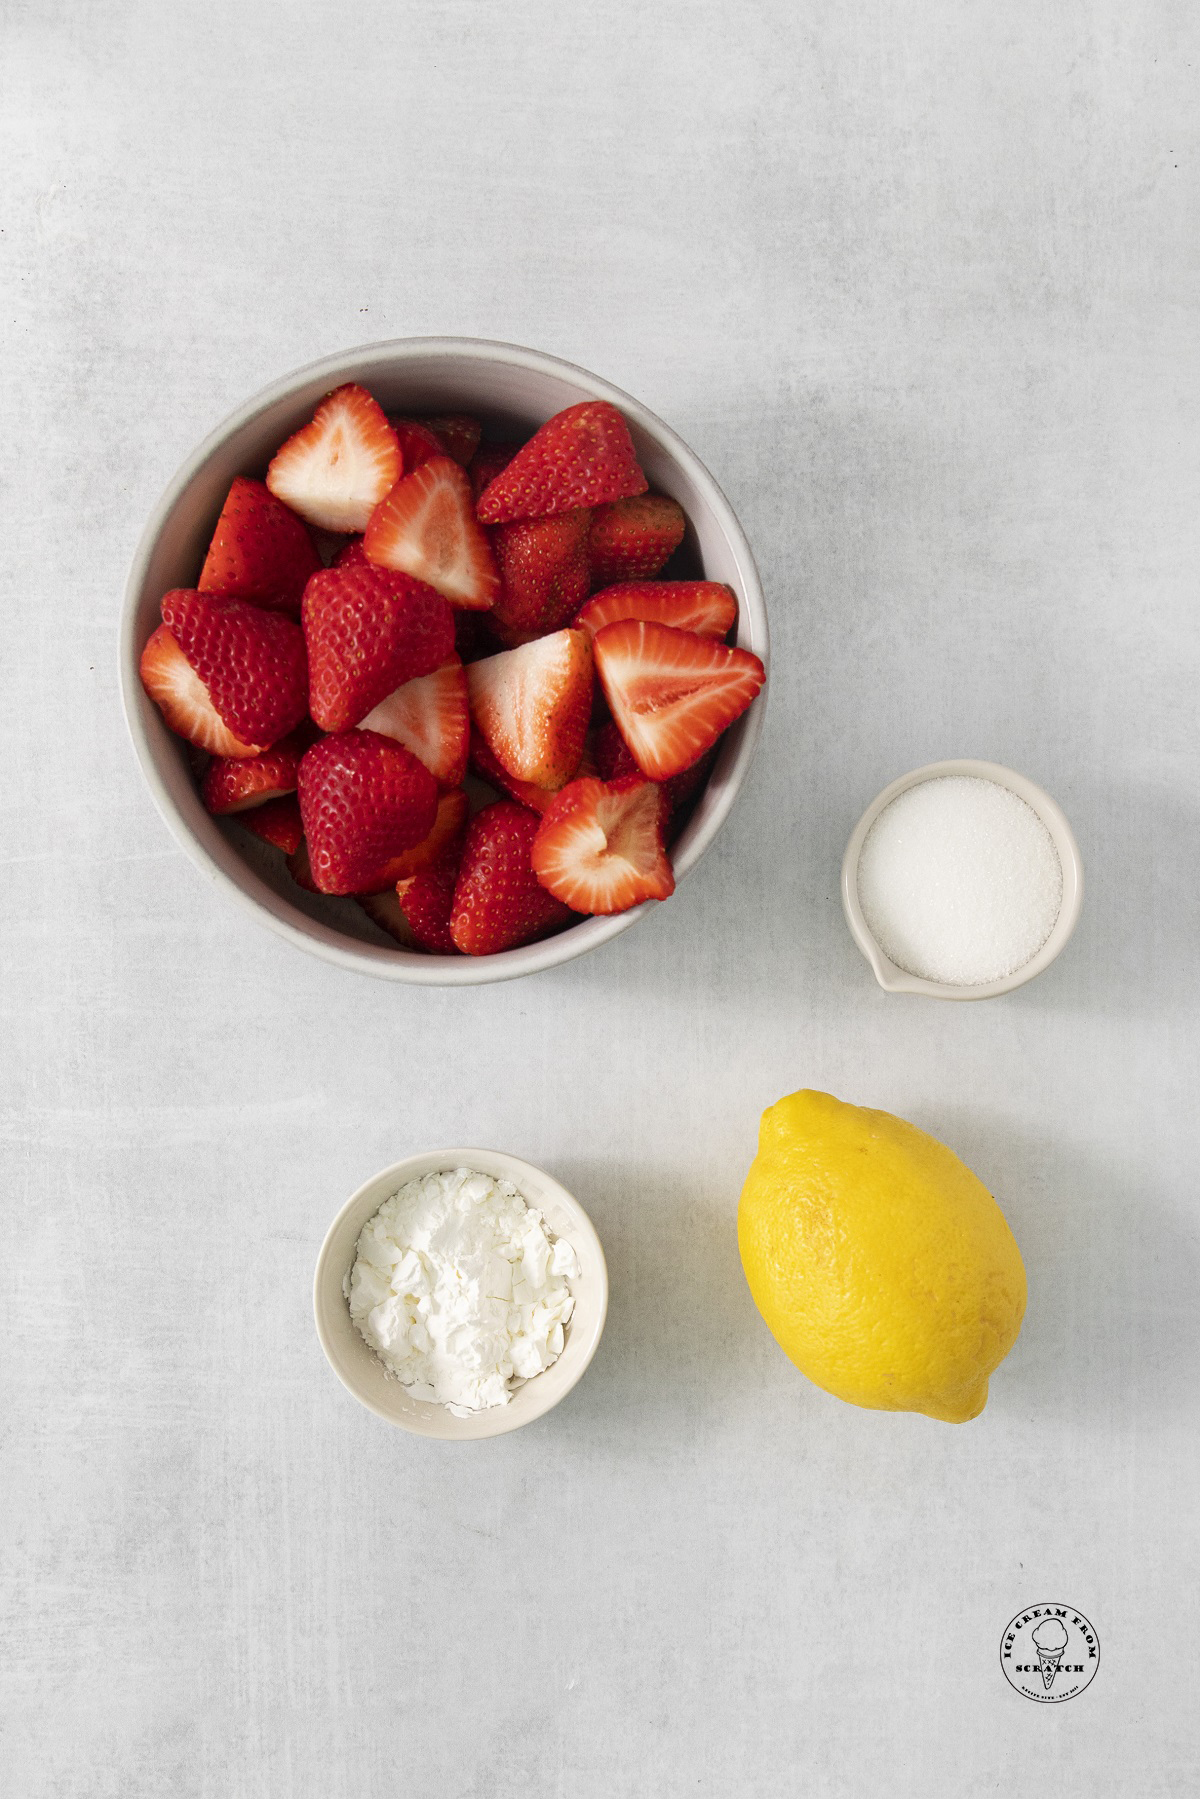 A bowl of sliced strawberries next to a lemon, a bowl of cornstarch and a bowl of sugar.